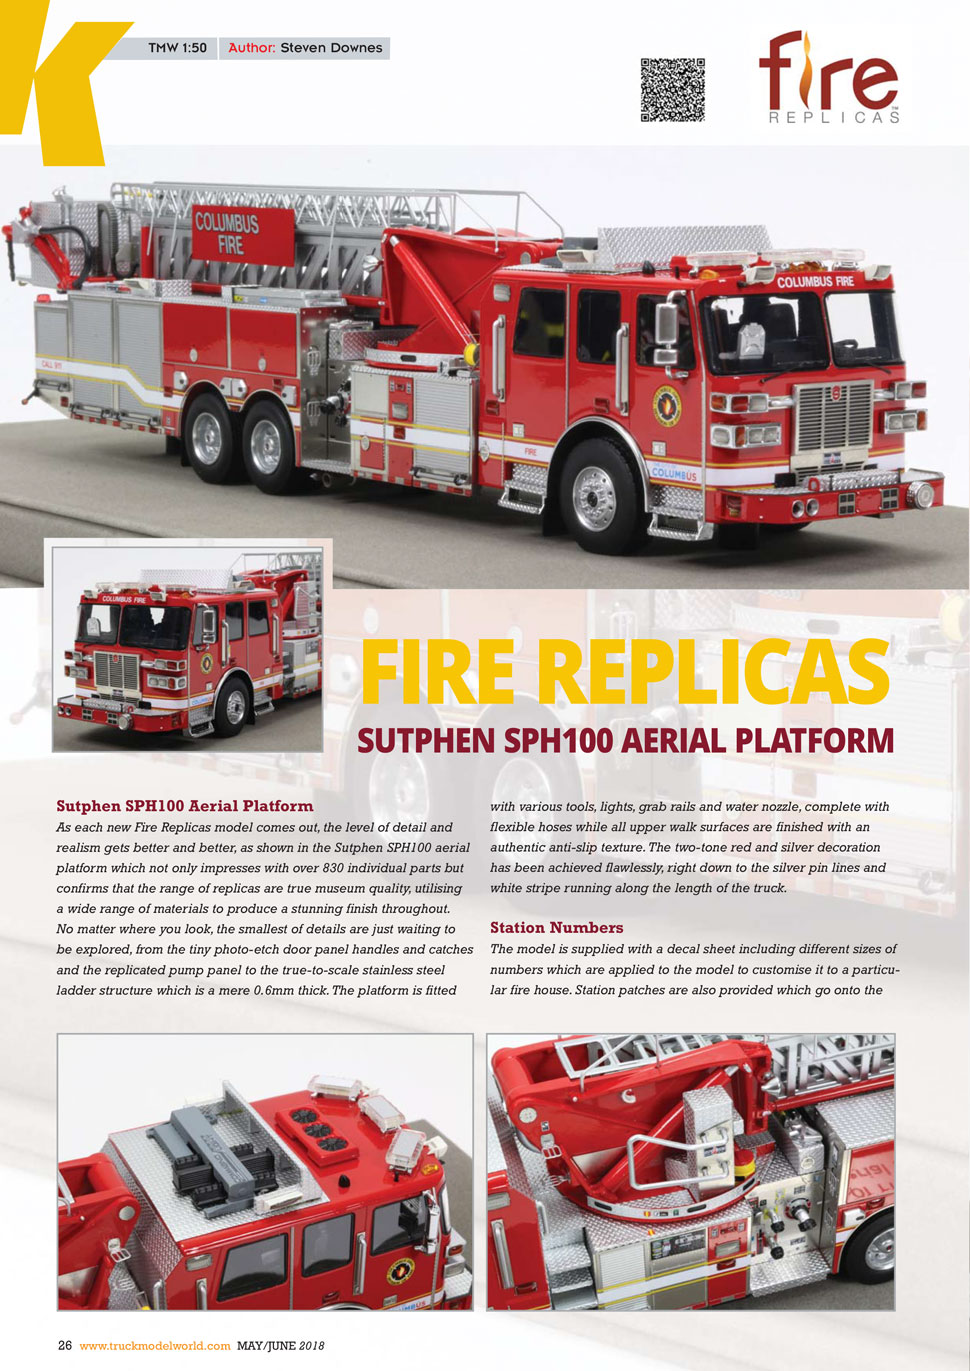 As seen in Truck Model World, May/June issue